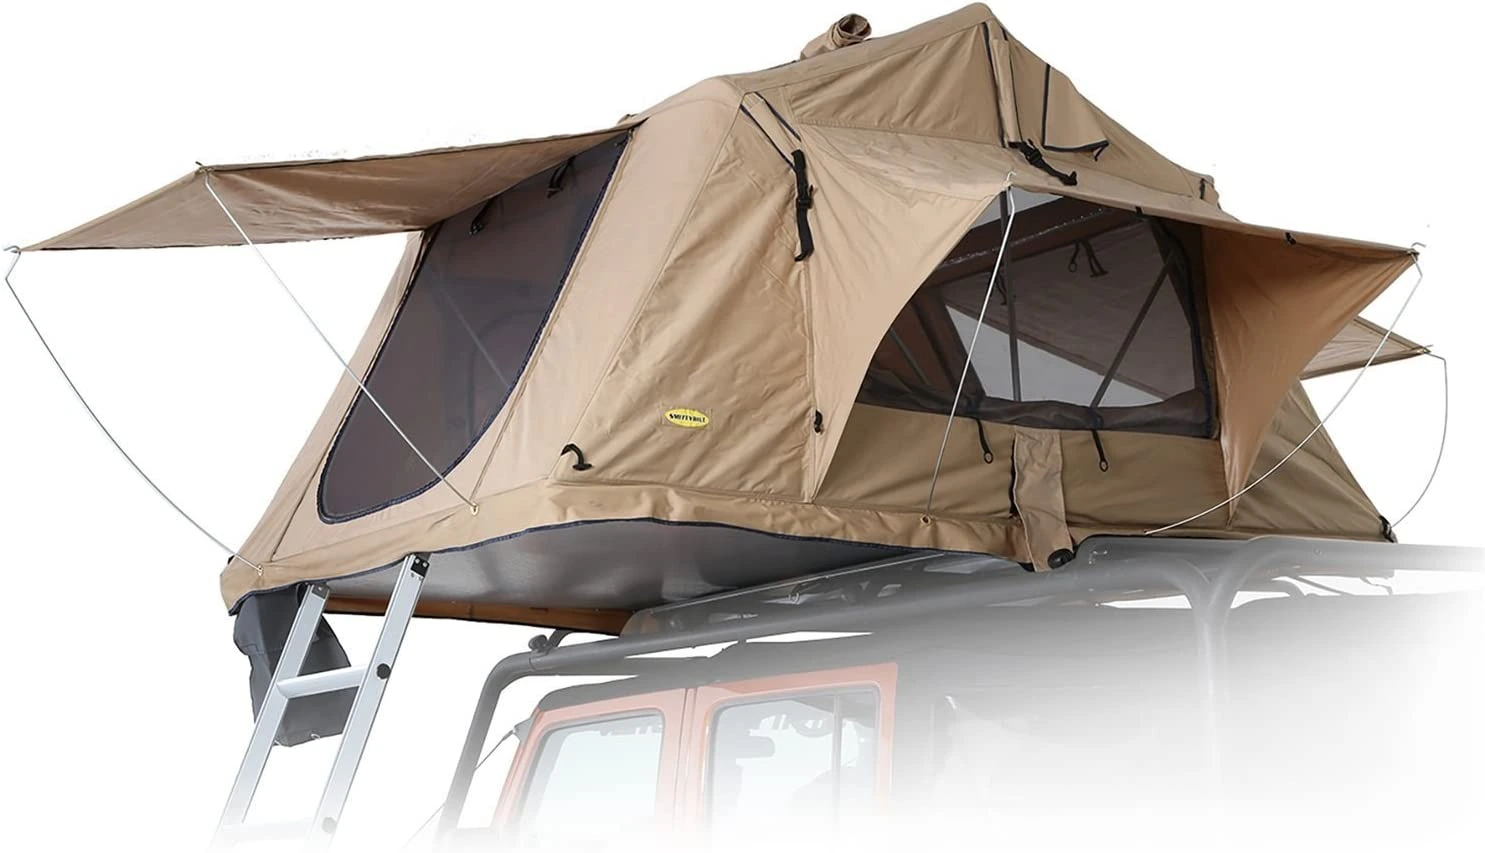 Smittybilt best roof mounted tent for SUVs and Jeep